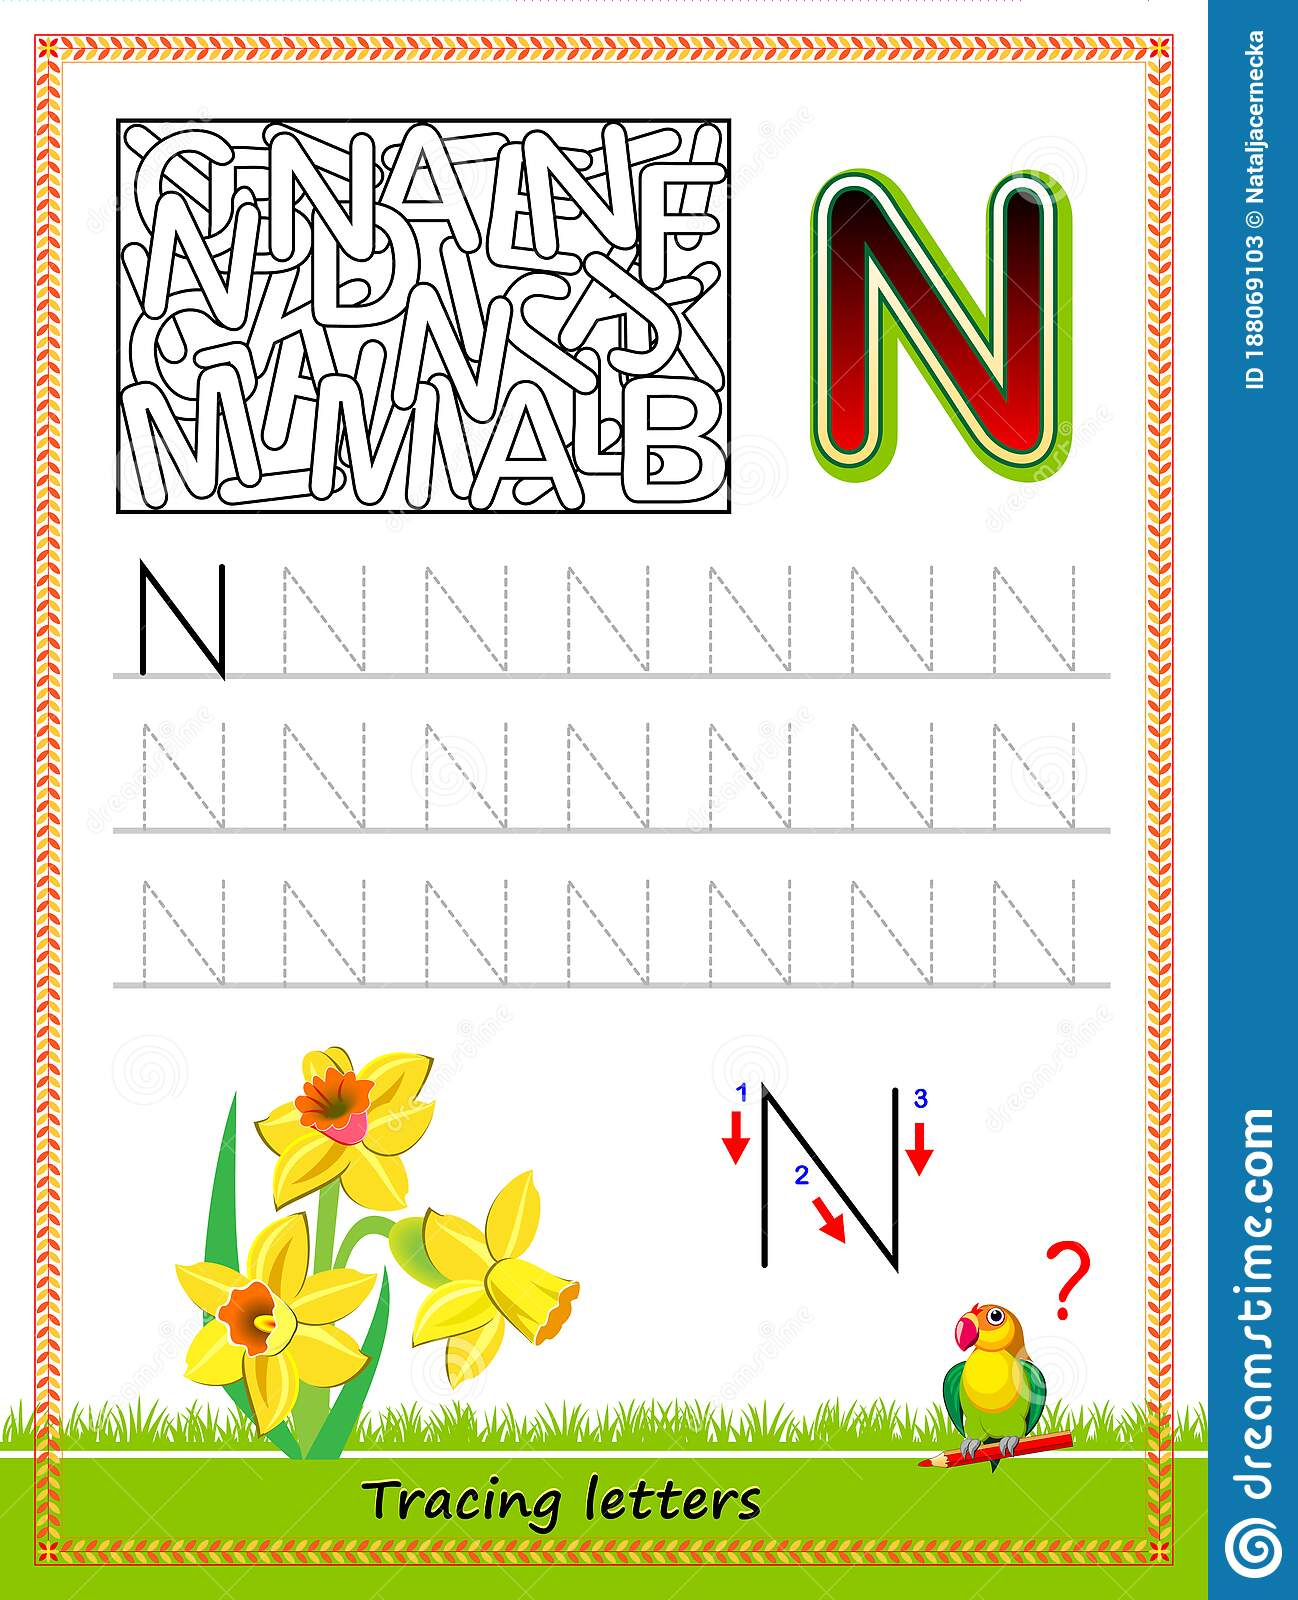 Worksheet For Tracing Letters. Find And Paint All Letters N